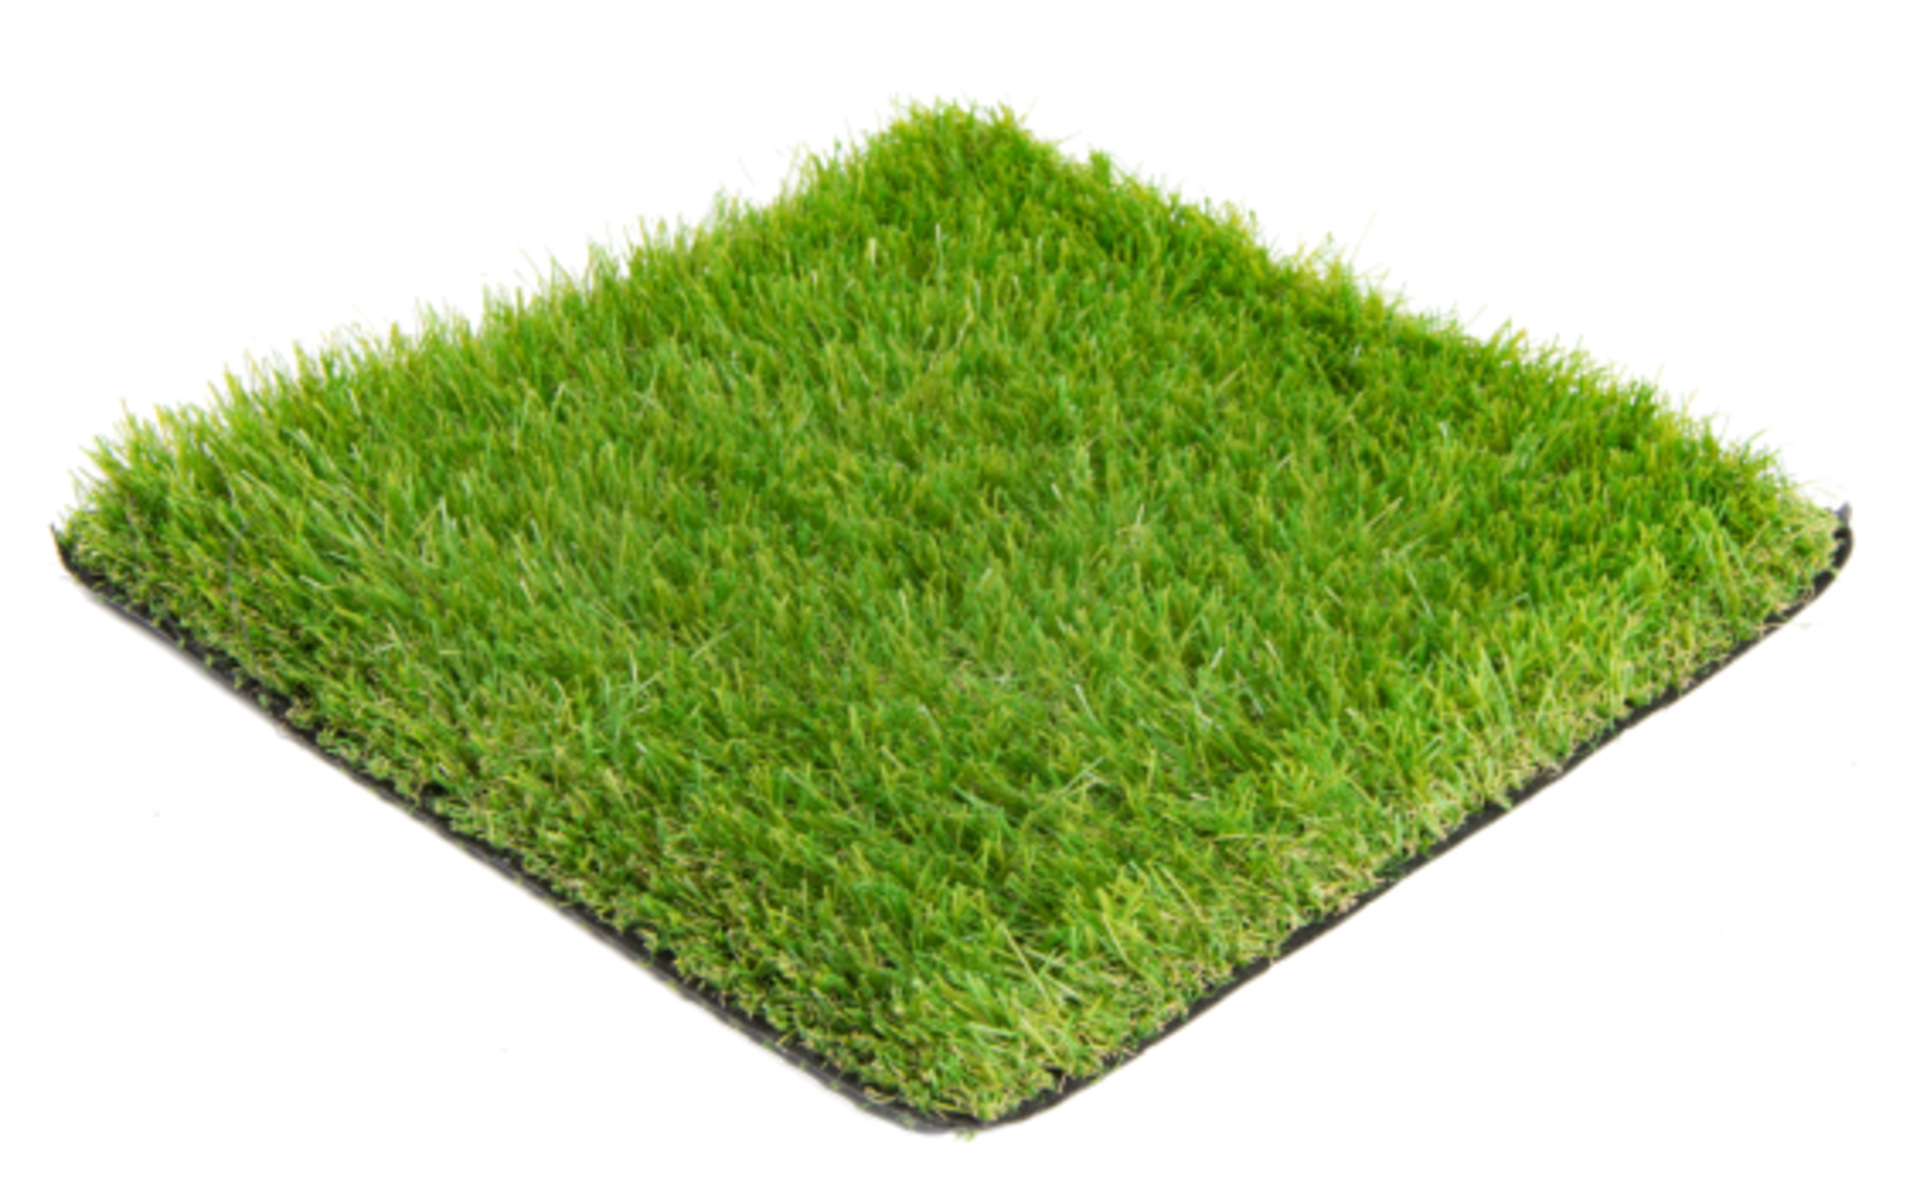 A Quarter Roll of Natural 35 Artificial Grass, 6.25 meters x 4 meters